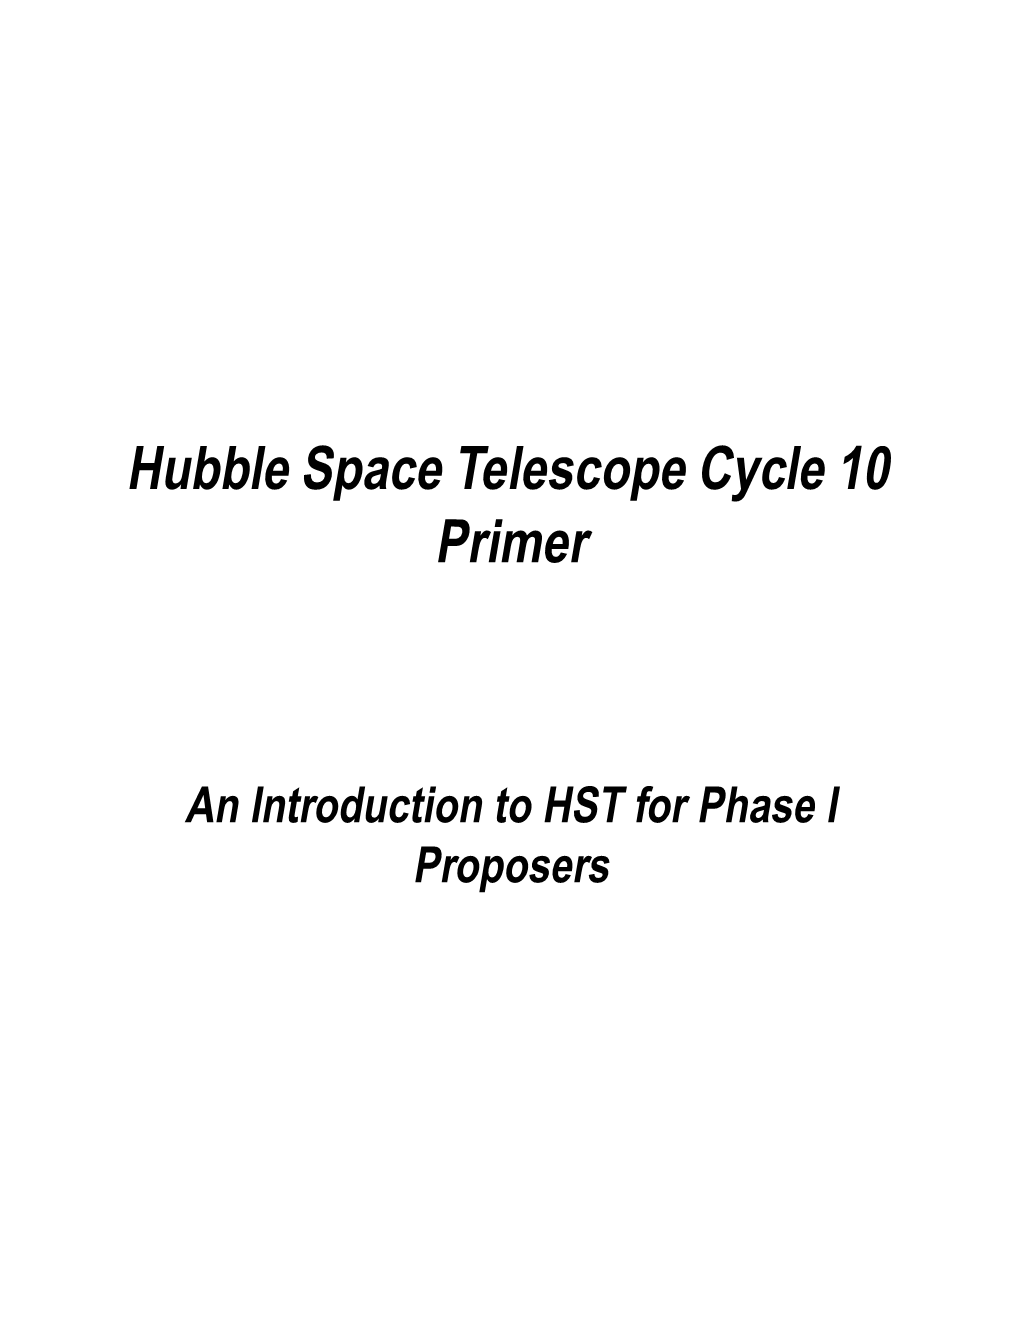 Hubble Space Telescope Cycle 10 Primer